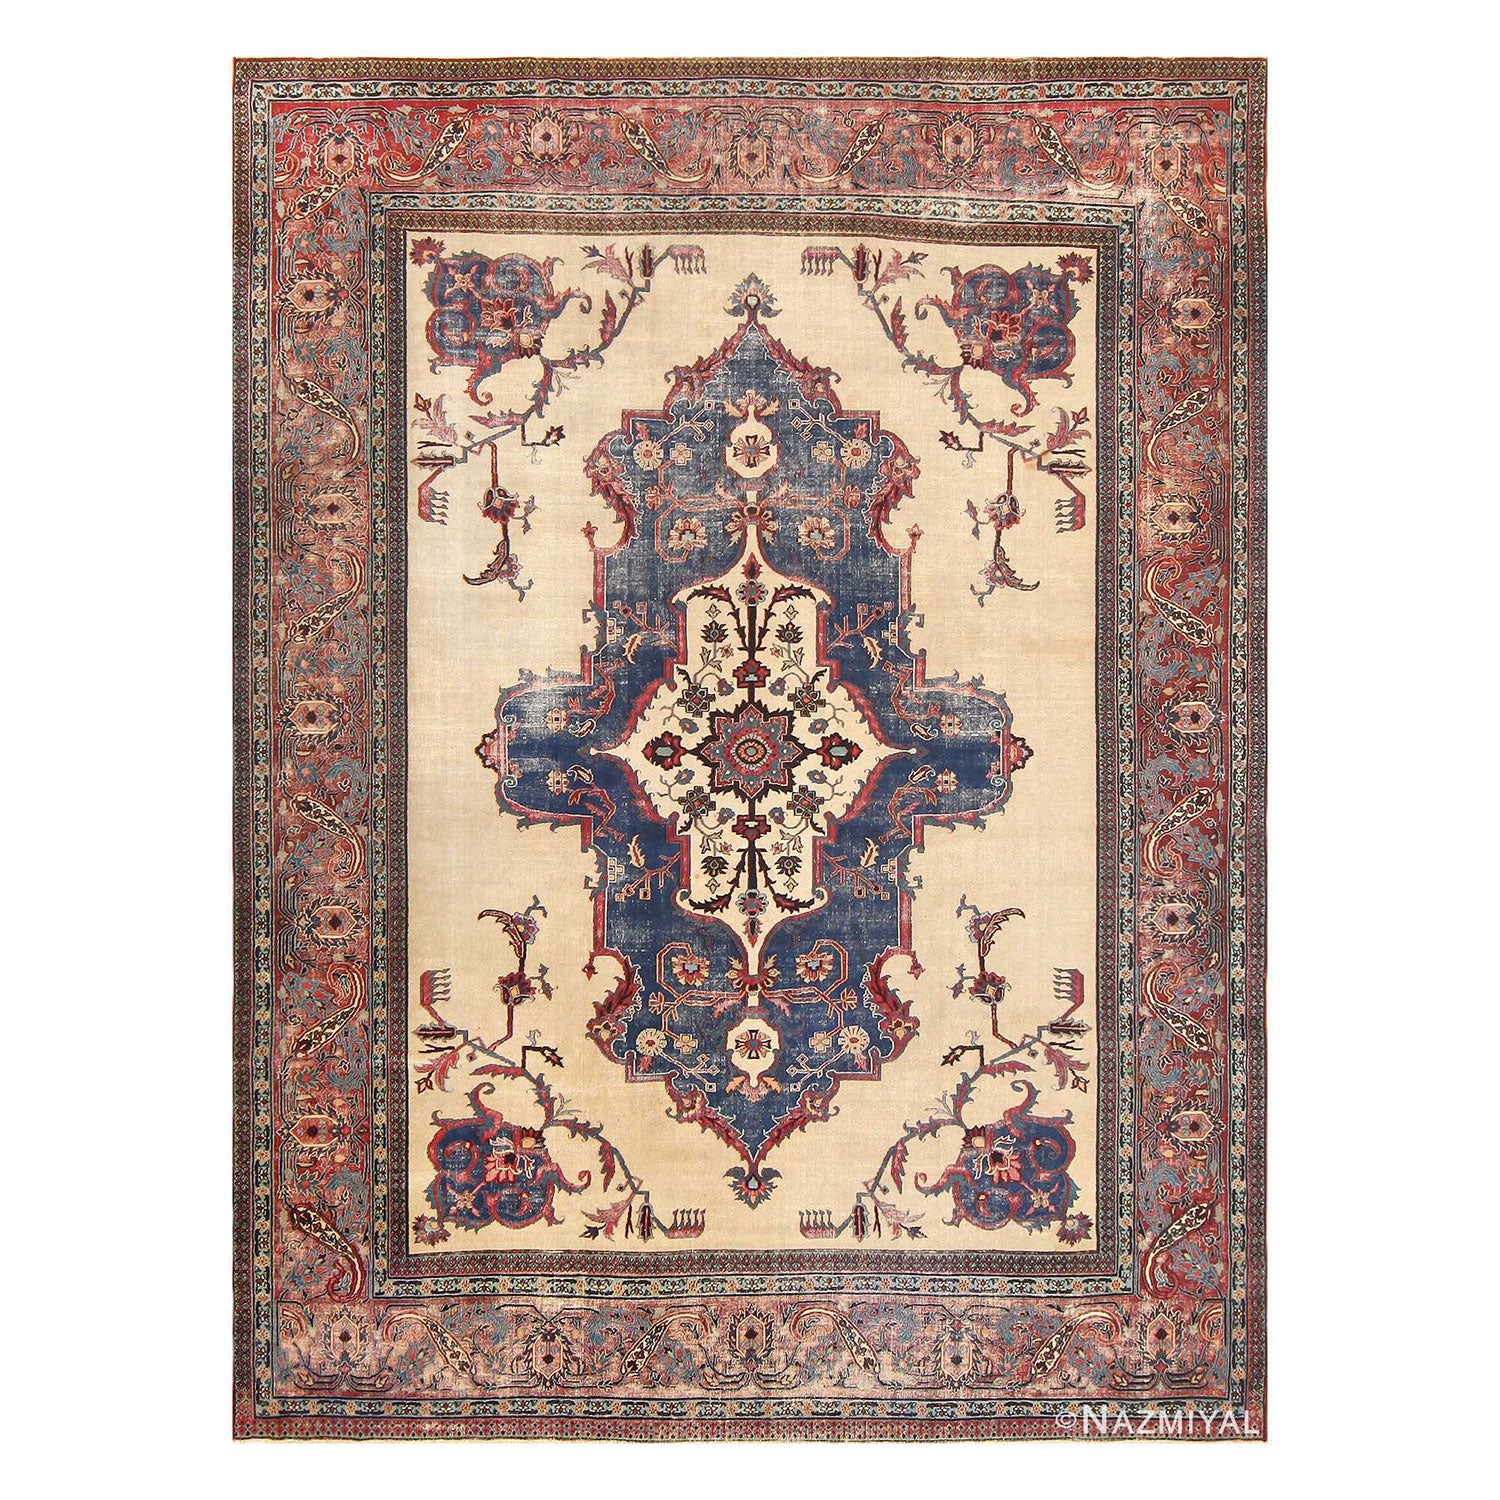 Ornate Oriental rug featuring intricate designs and patterns from Nazmiyal Collection.